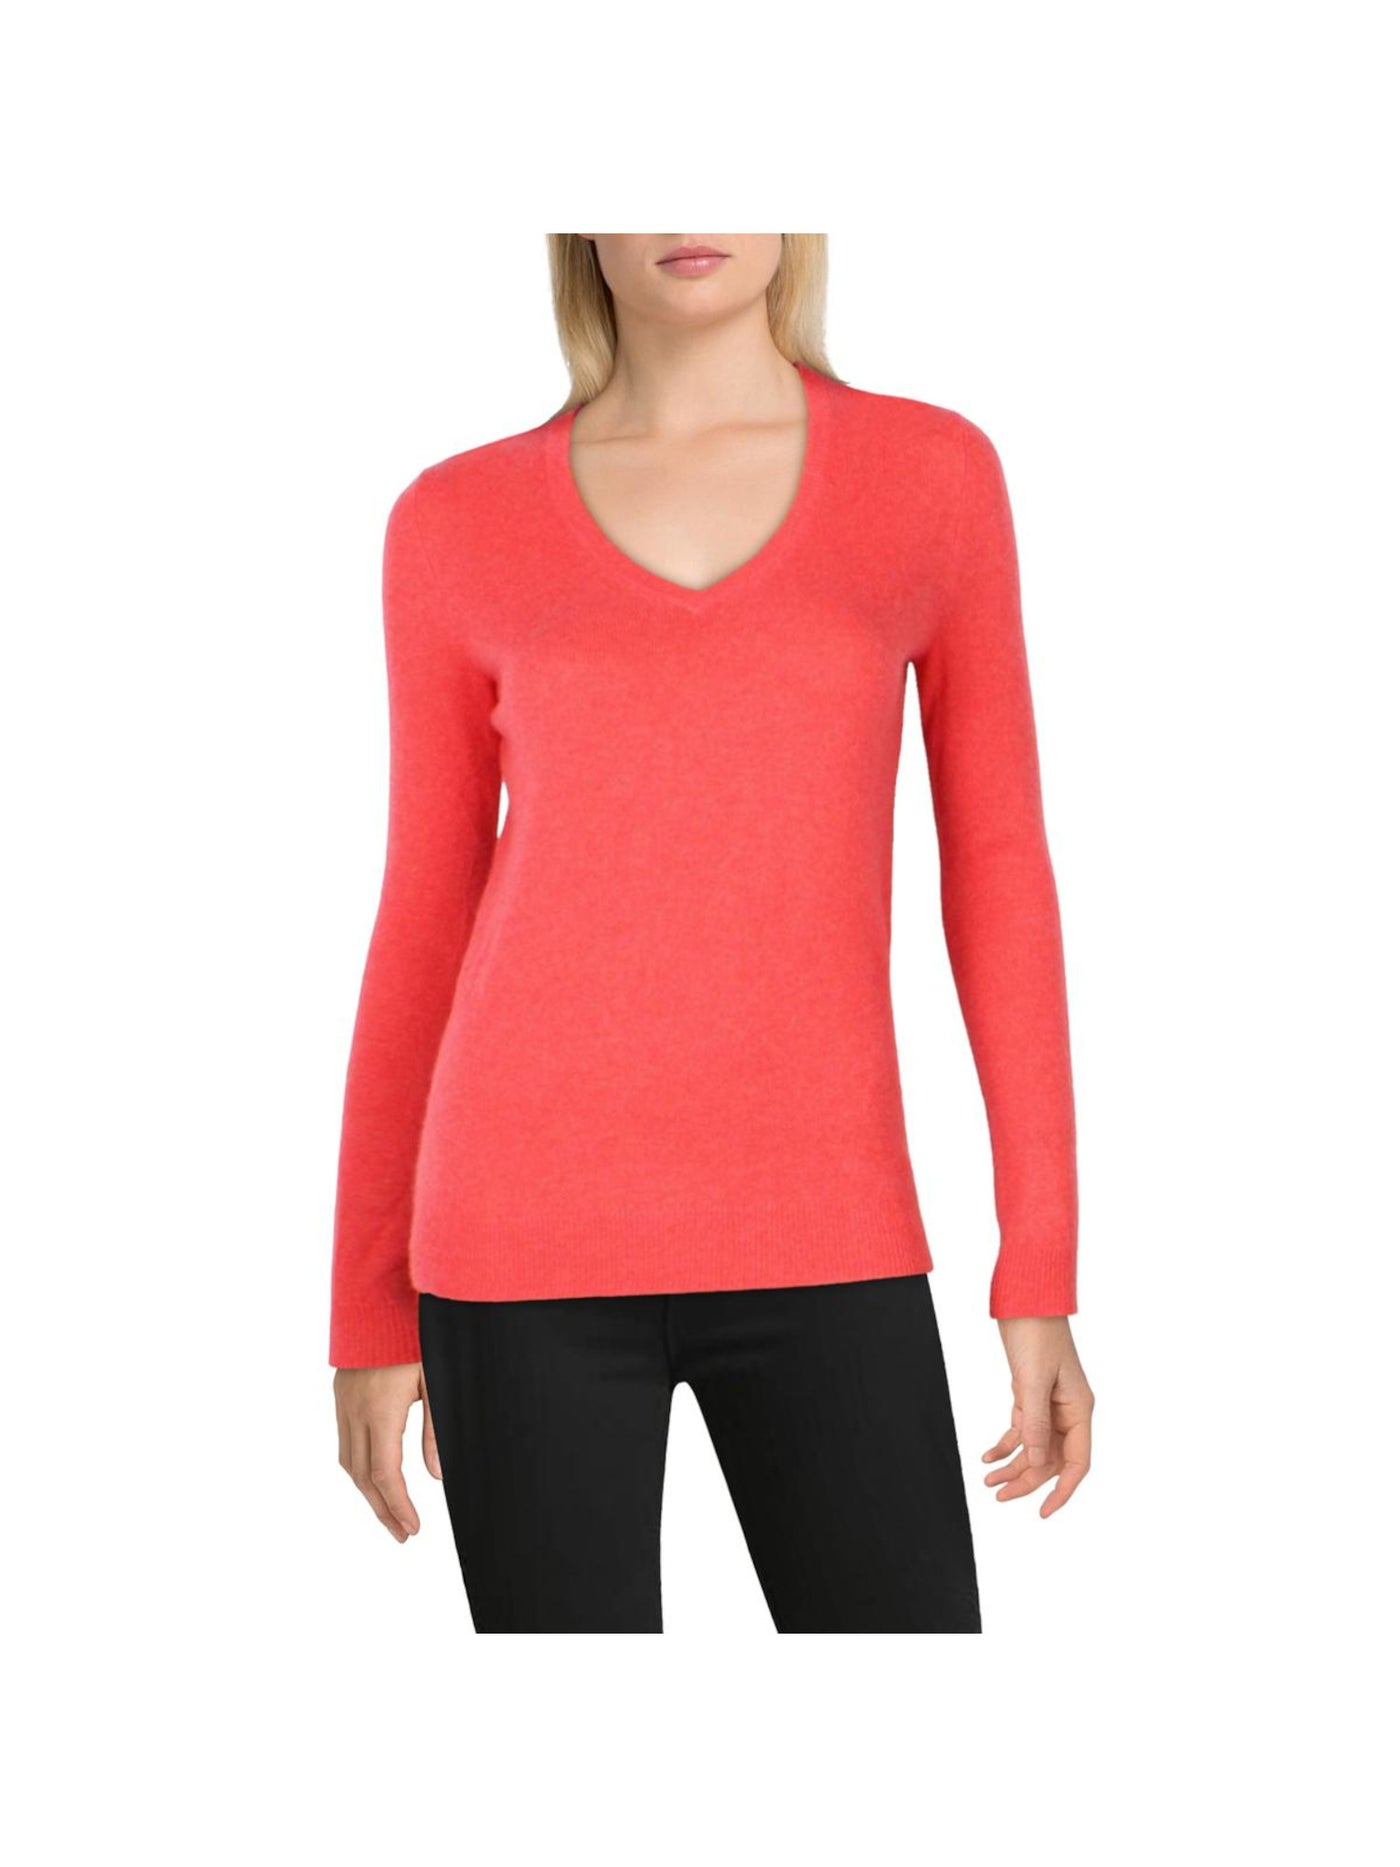 Designer Brand Womens Coral Cashmere Long Sleeve V Neck Wear To Work Sweater XS